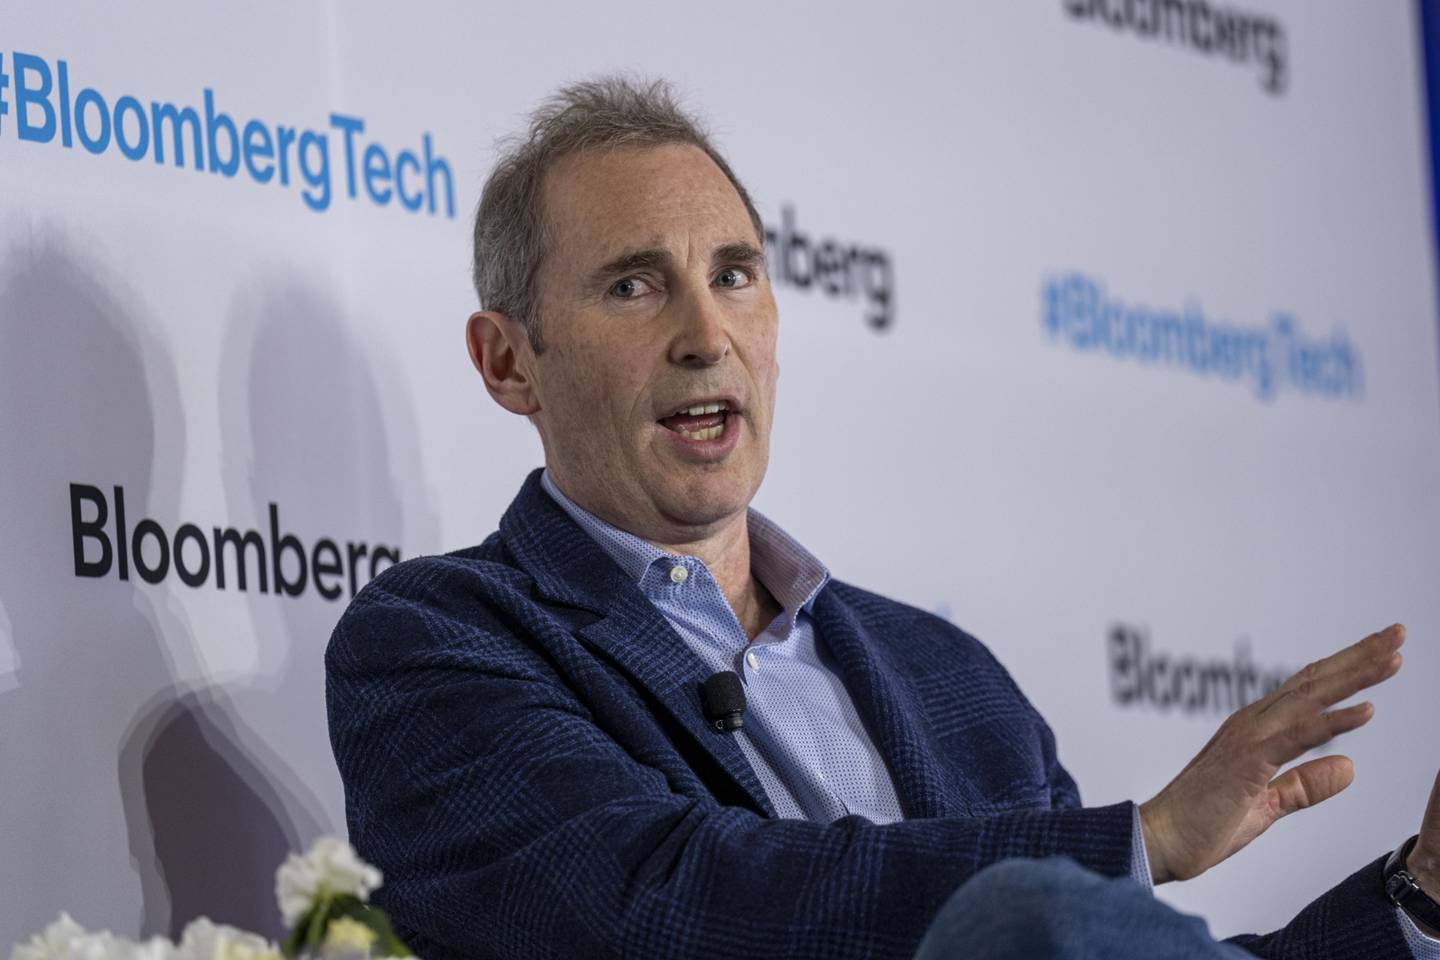 Andy Jassy, chief executive officer of Amazon.Com Inc., speaks during the Bloomberg Technology Summit in San Francisco, California.